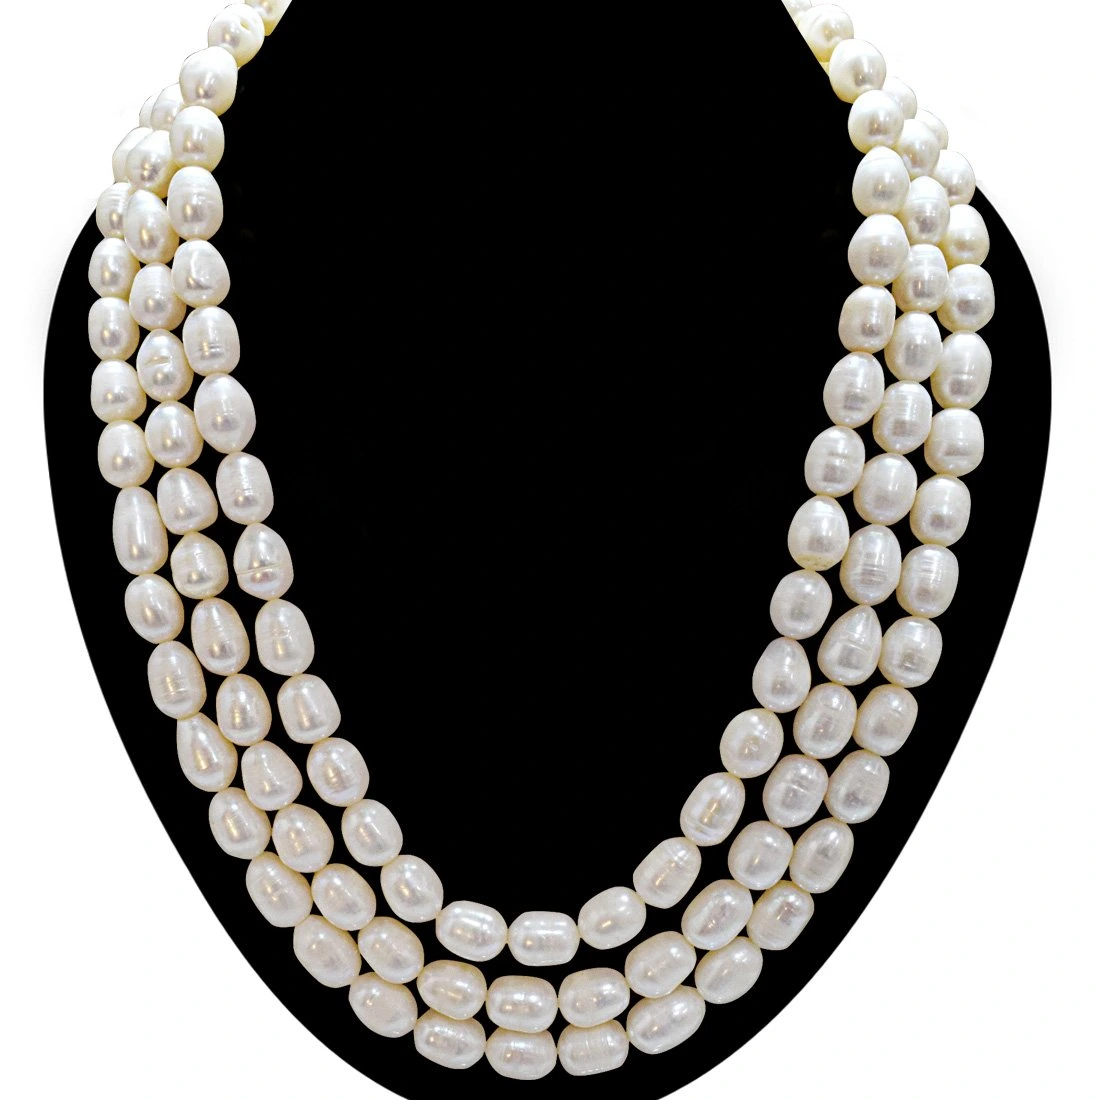 3 Line Real Big Elongated Pearl Necklace for Women (SN869)